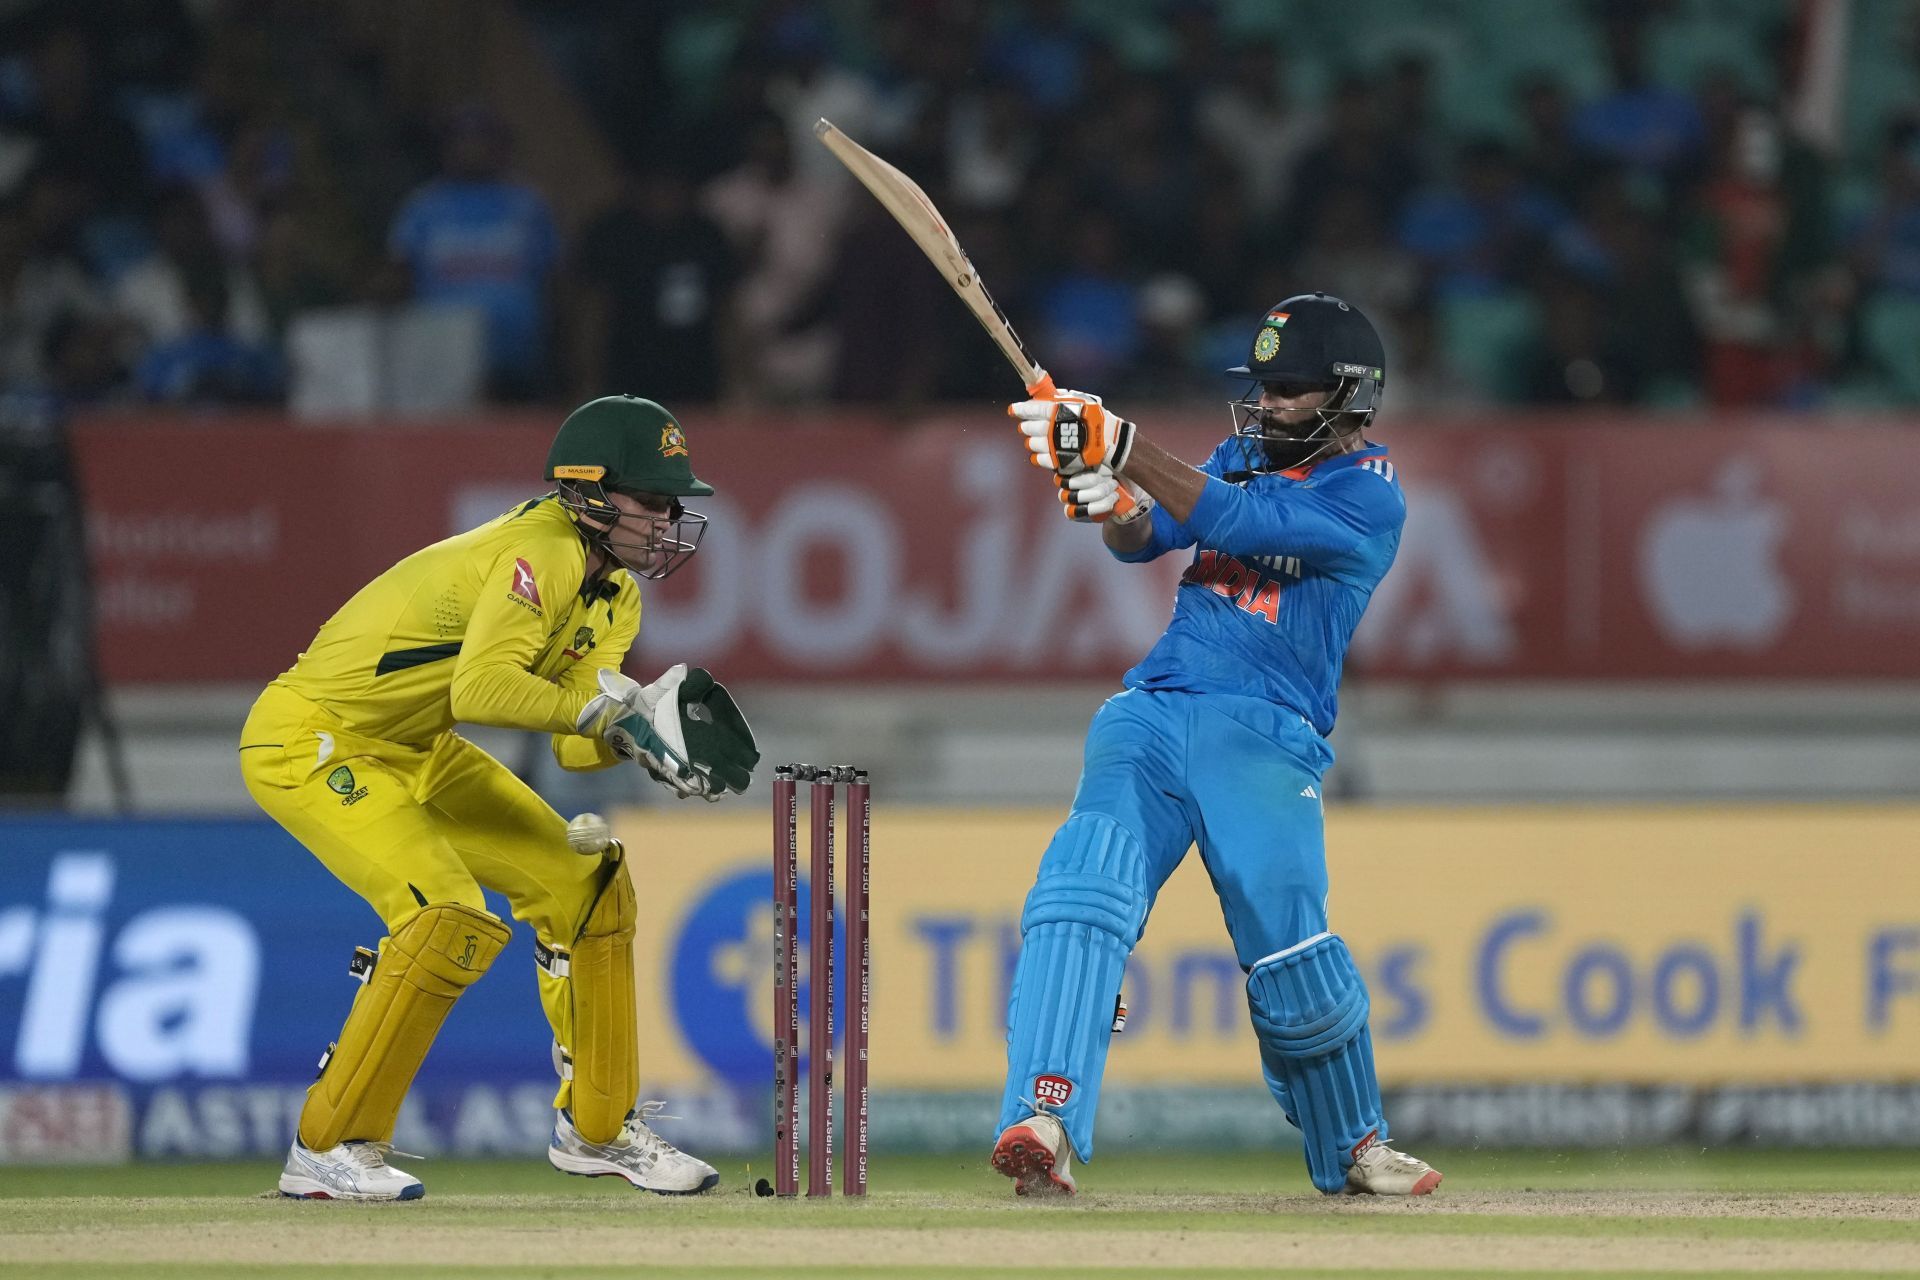 With Axar Patel ruled out, the onus is on Ravindra Jadeja (R) to deliver his best with the bat.